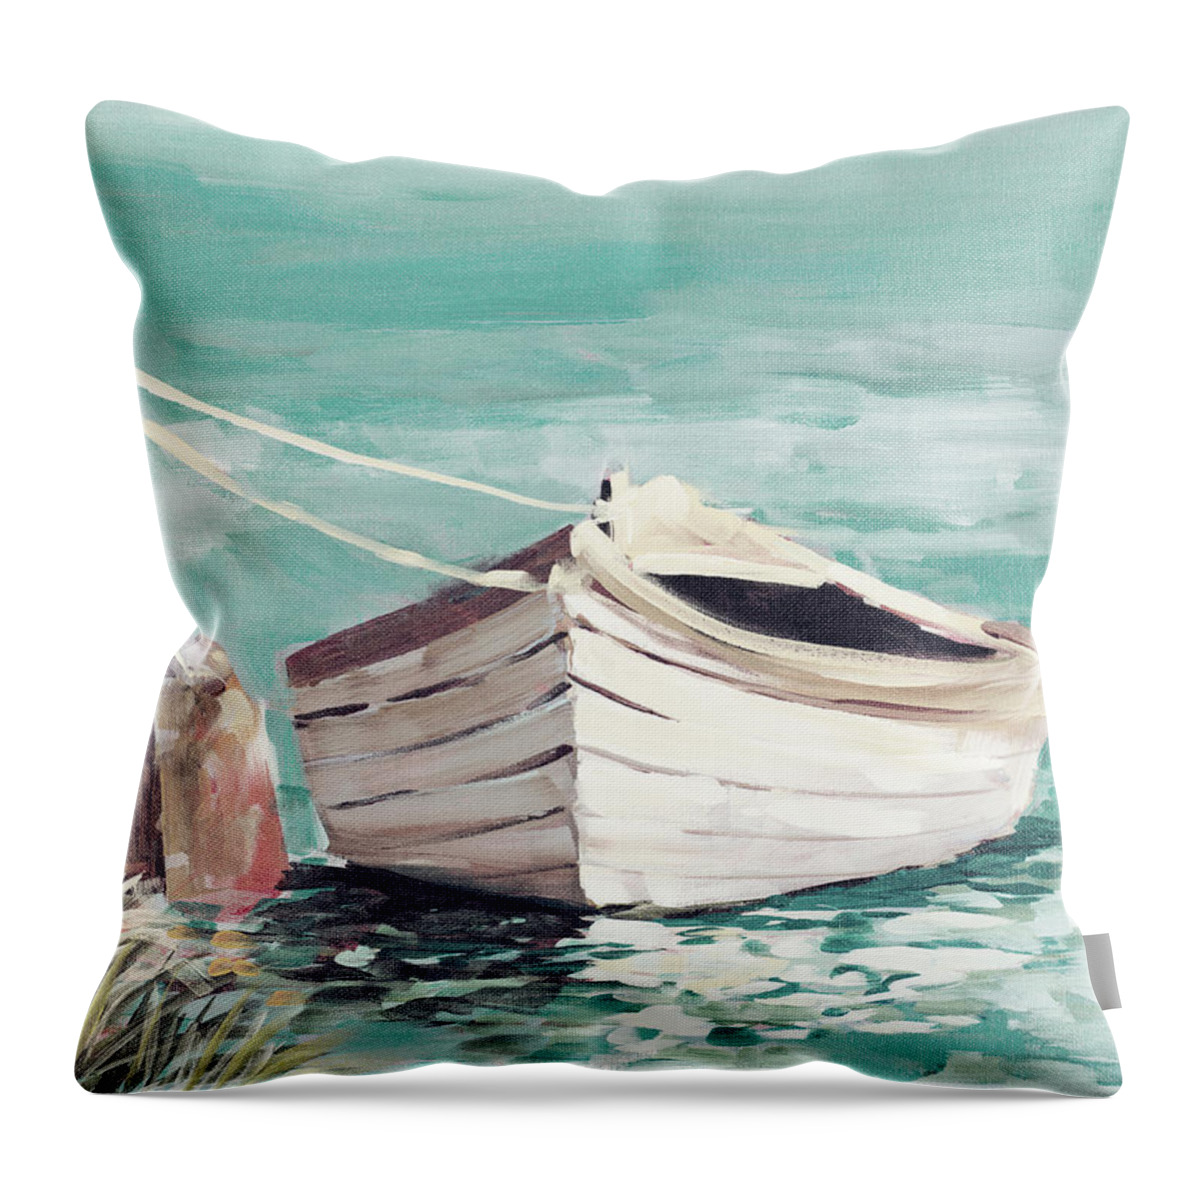 Canoe Throw Pillow featuring the painting Canoe by Jane Slivka